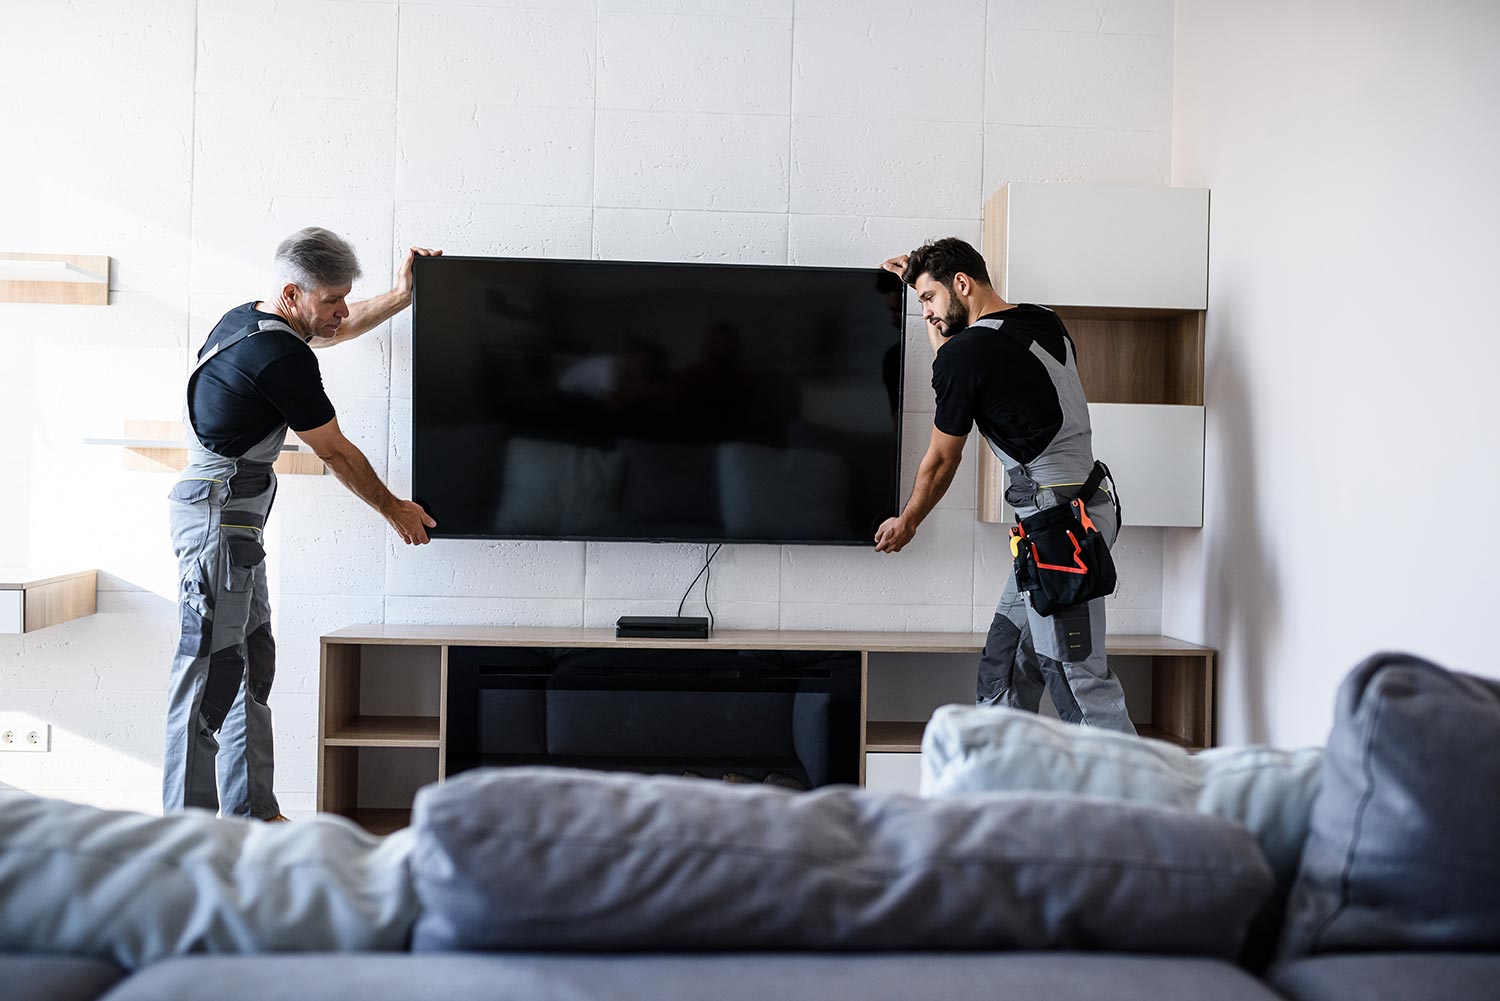 Workers in uniform installing television on the wall indoors